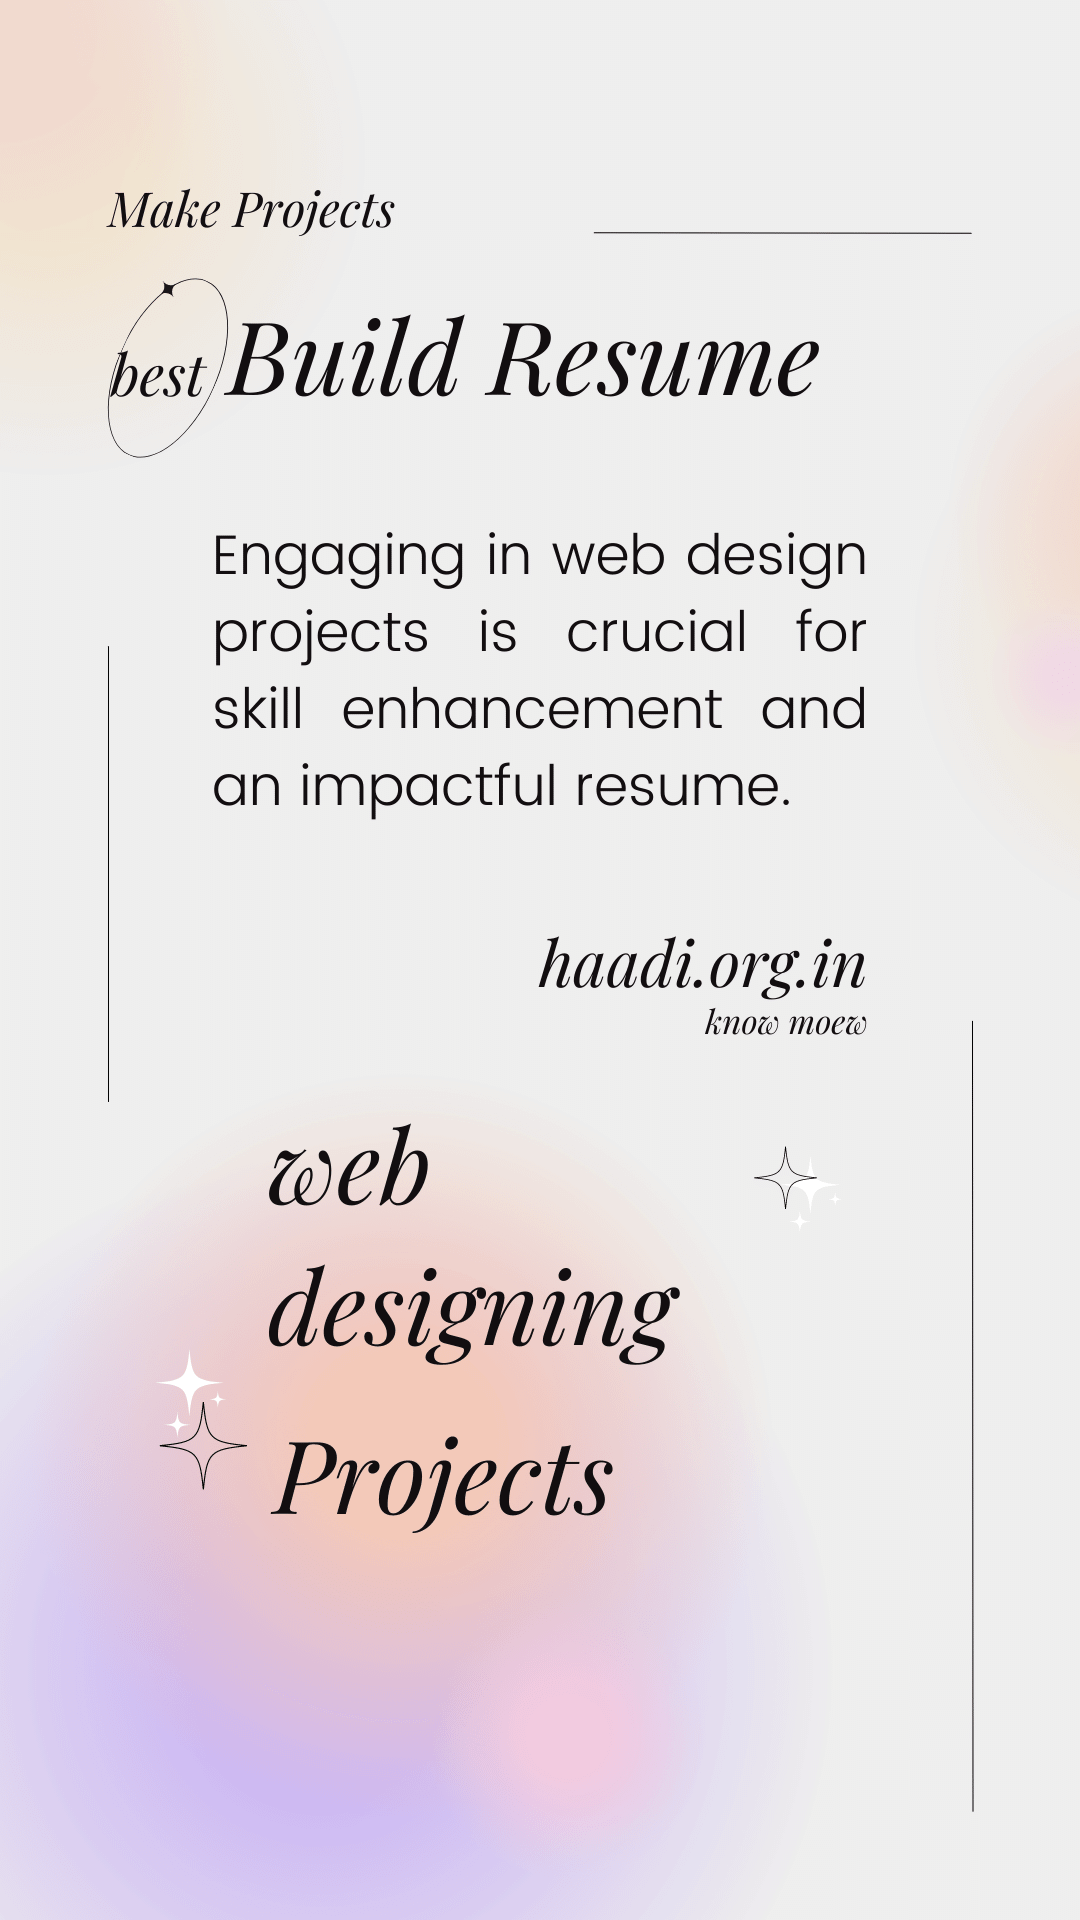 web designing projects